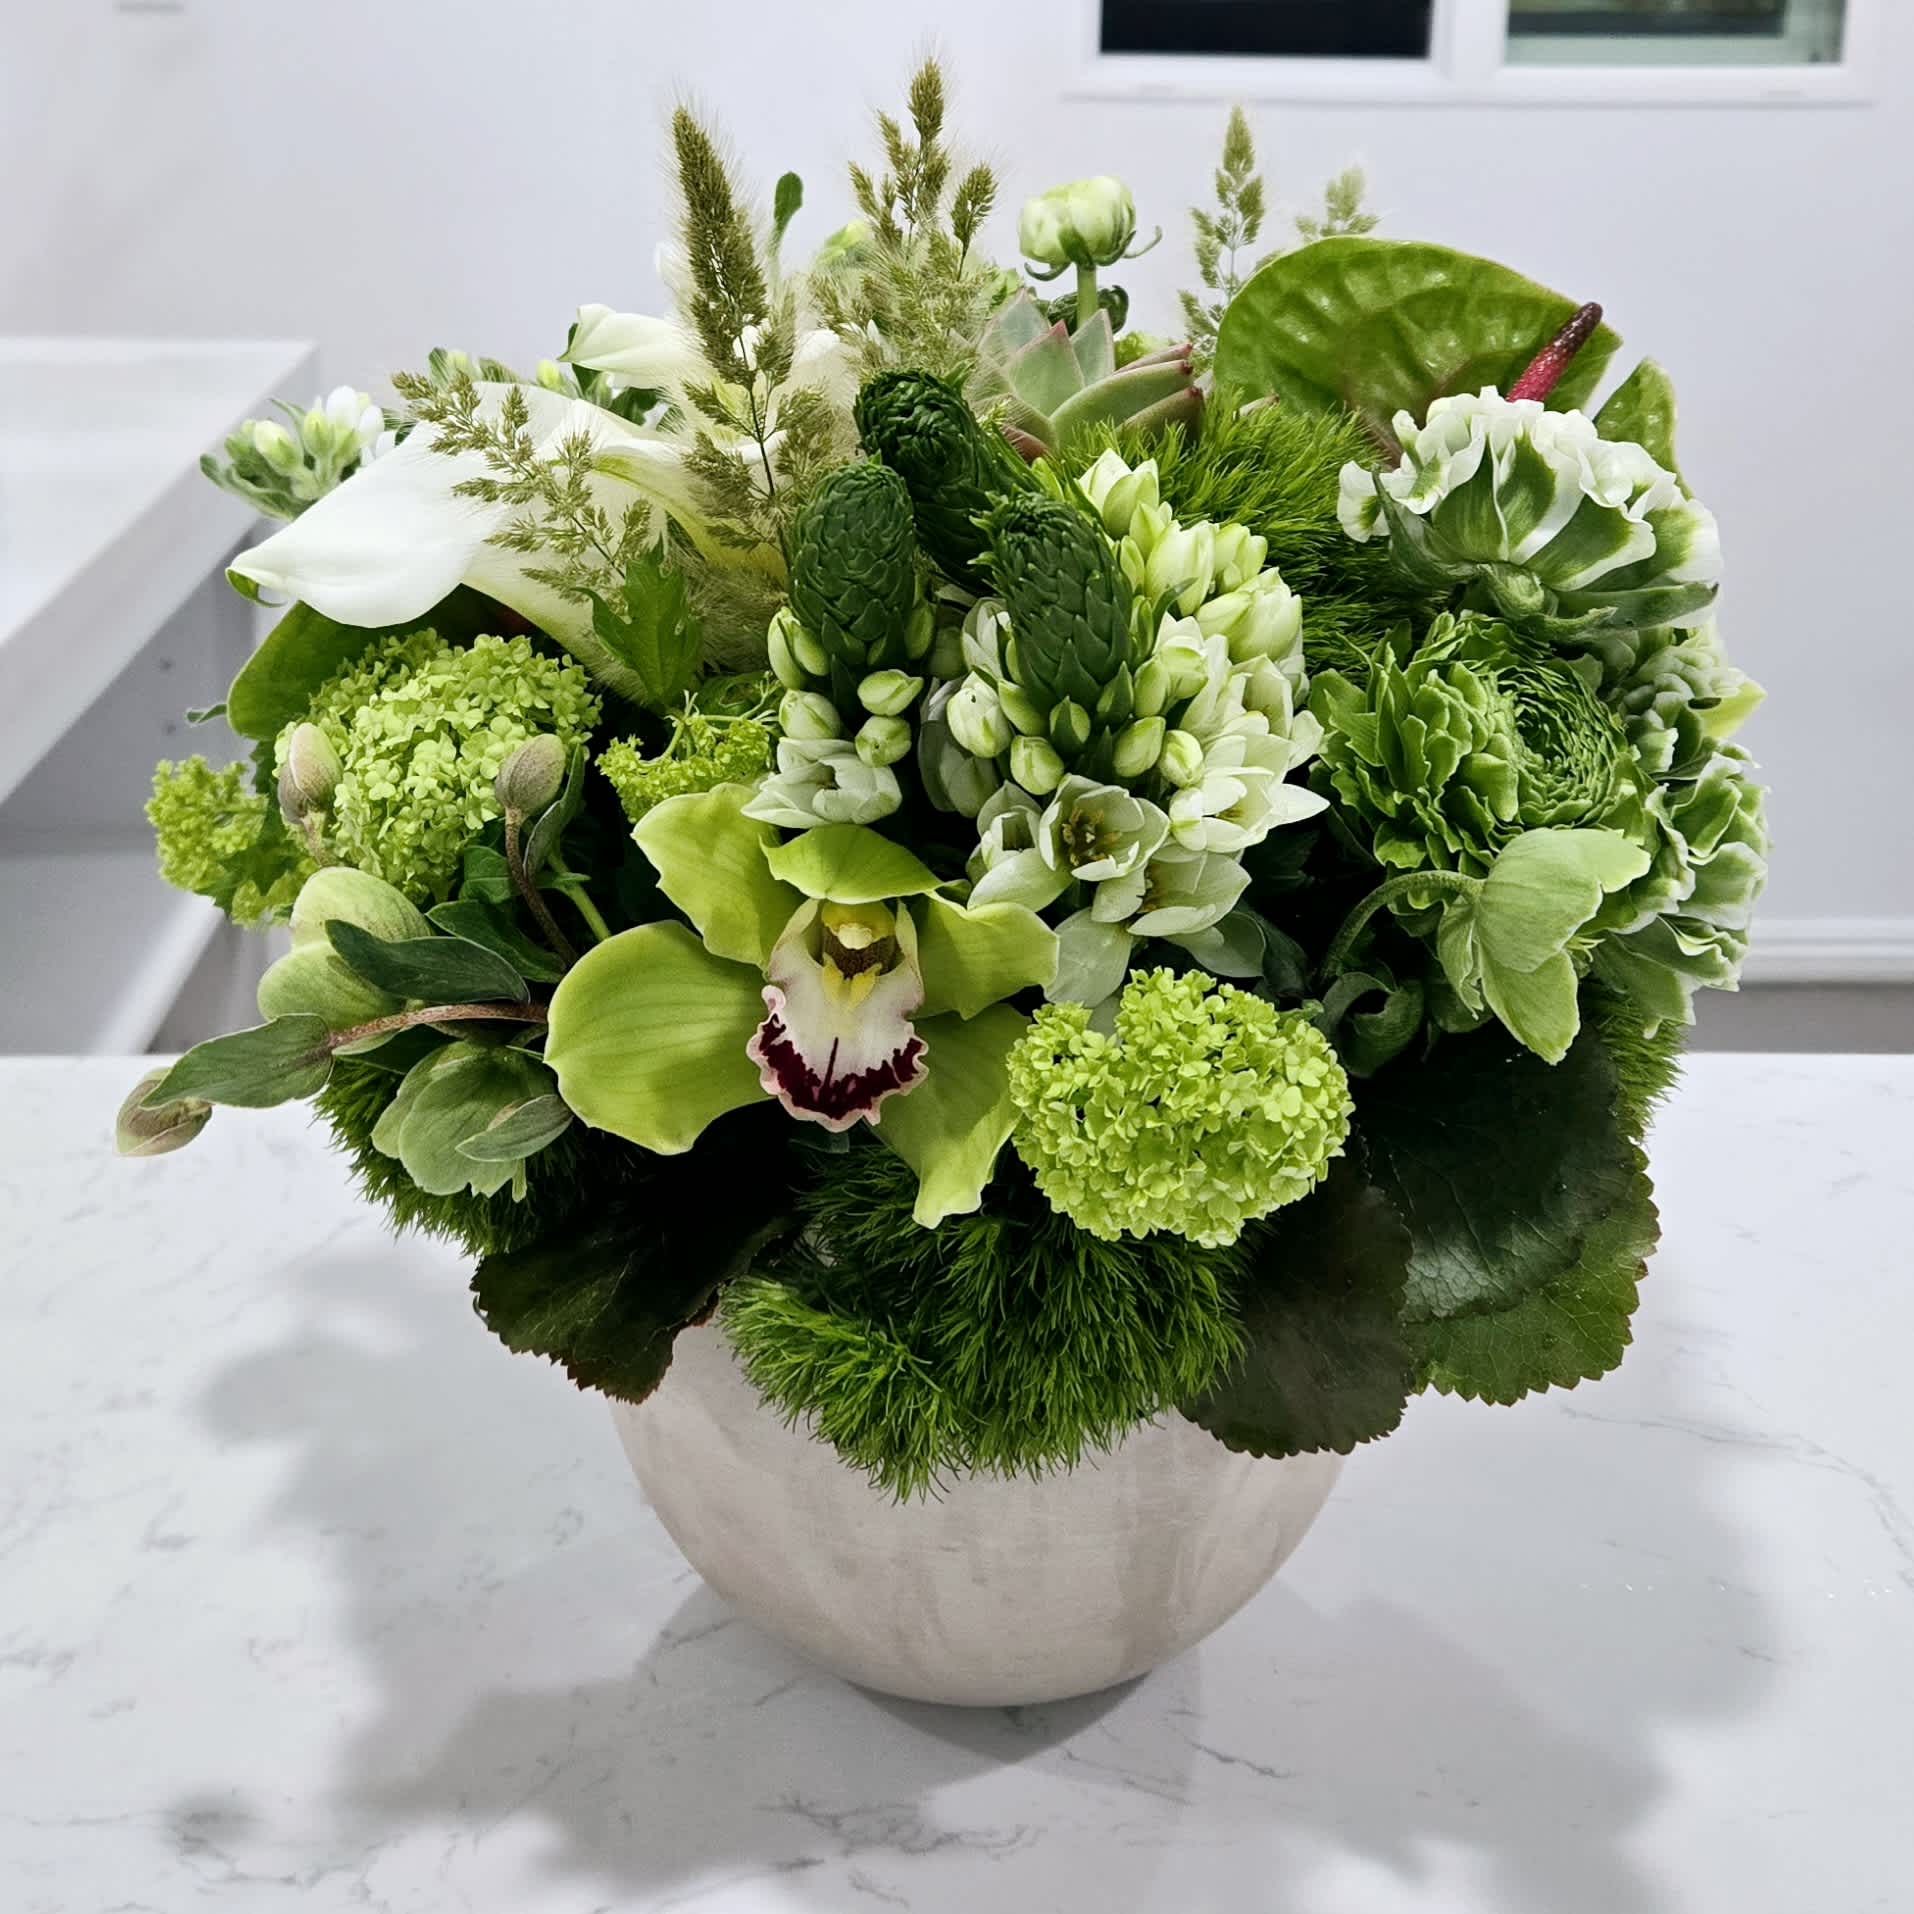 Green Vibes - An organic style arrangement with a composition of green unusual elements and a touch of premium white blooms designed in a neutral color bowl.